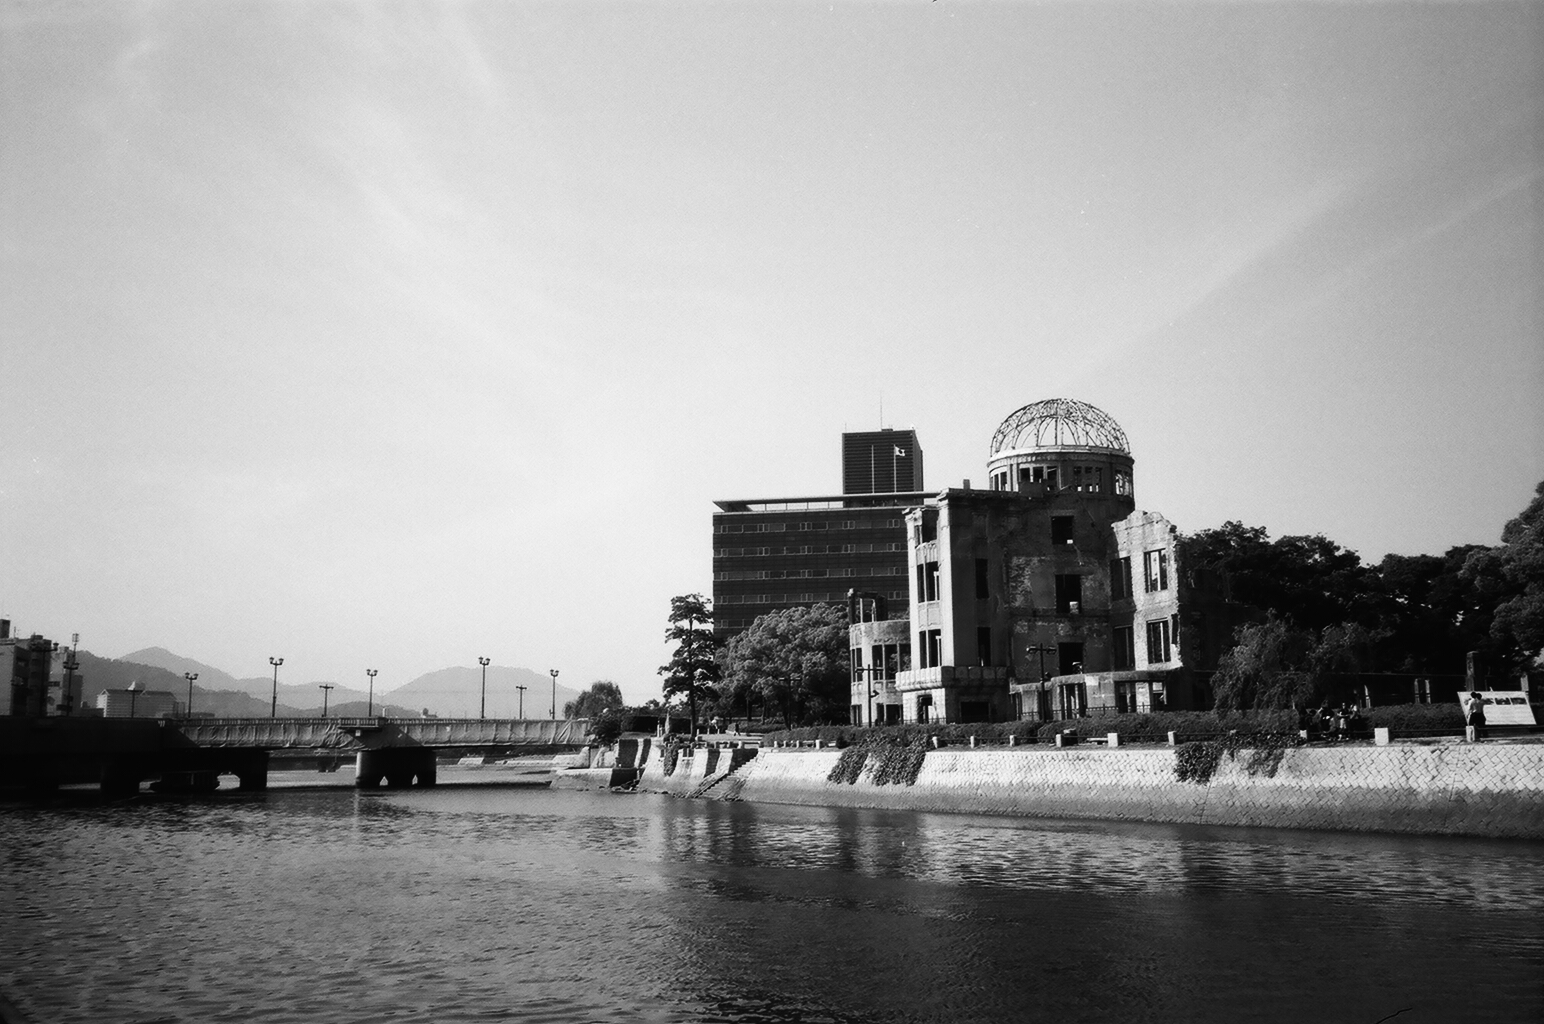  The Peace Dome sits on the bank of the Ōta River. The river formed the famous delta, basins and embankments upon which the city was built, and provided the topography for it's eventual military significance. 